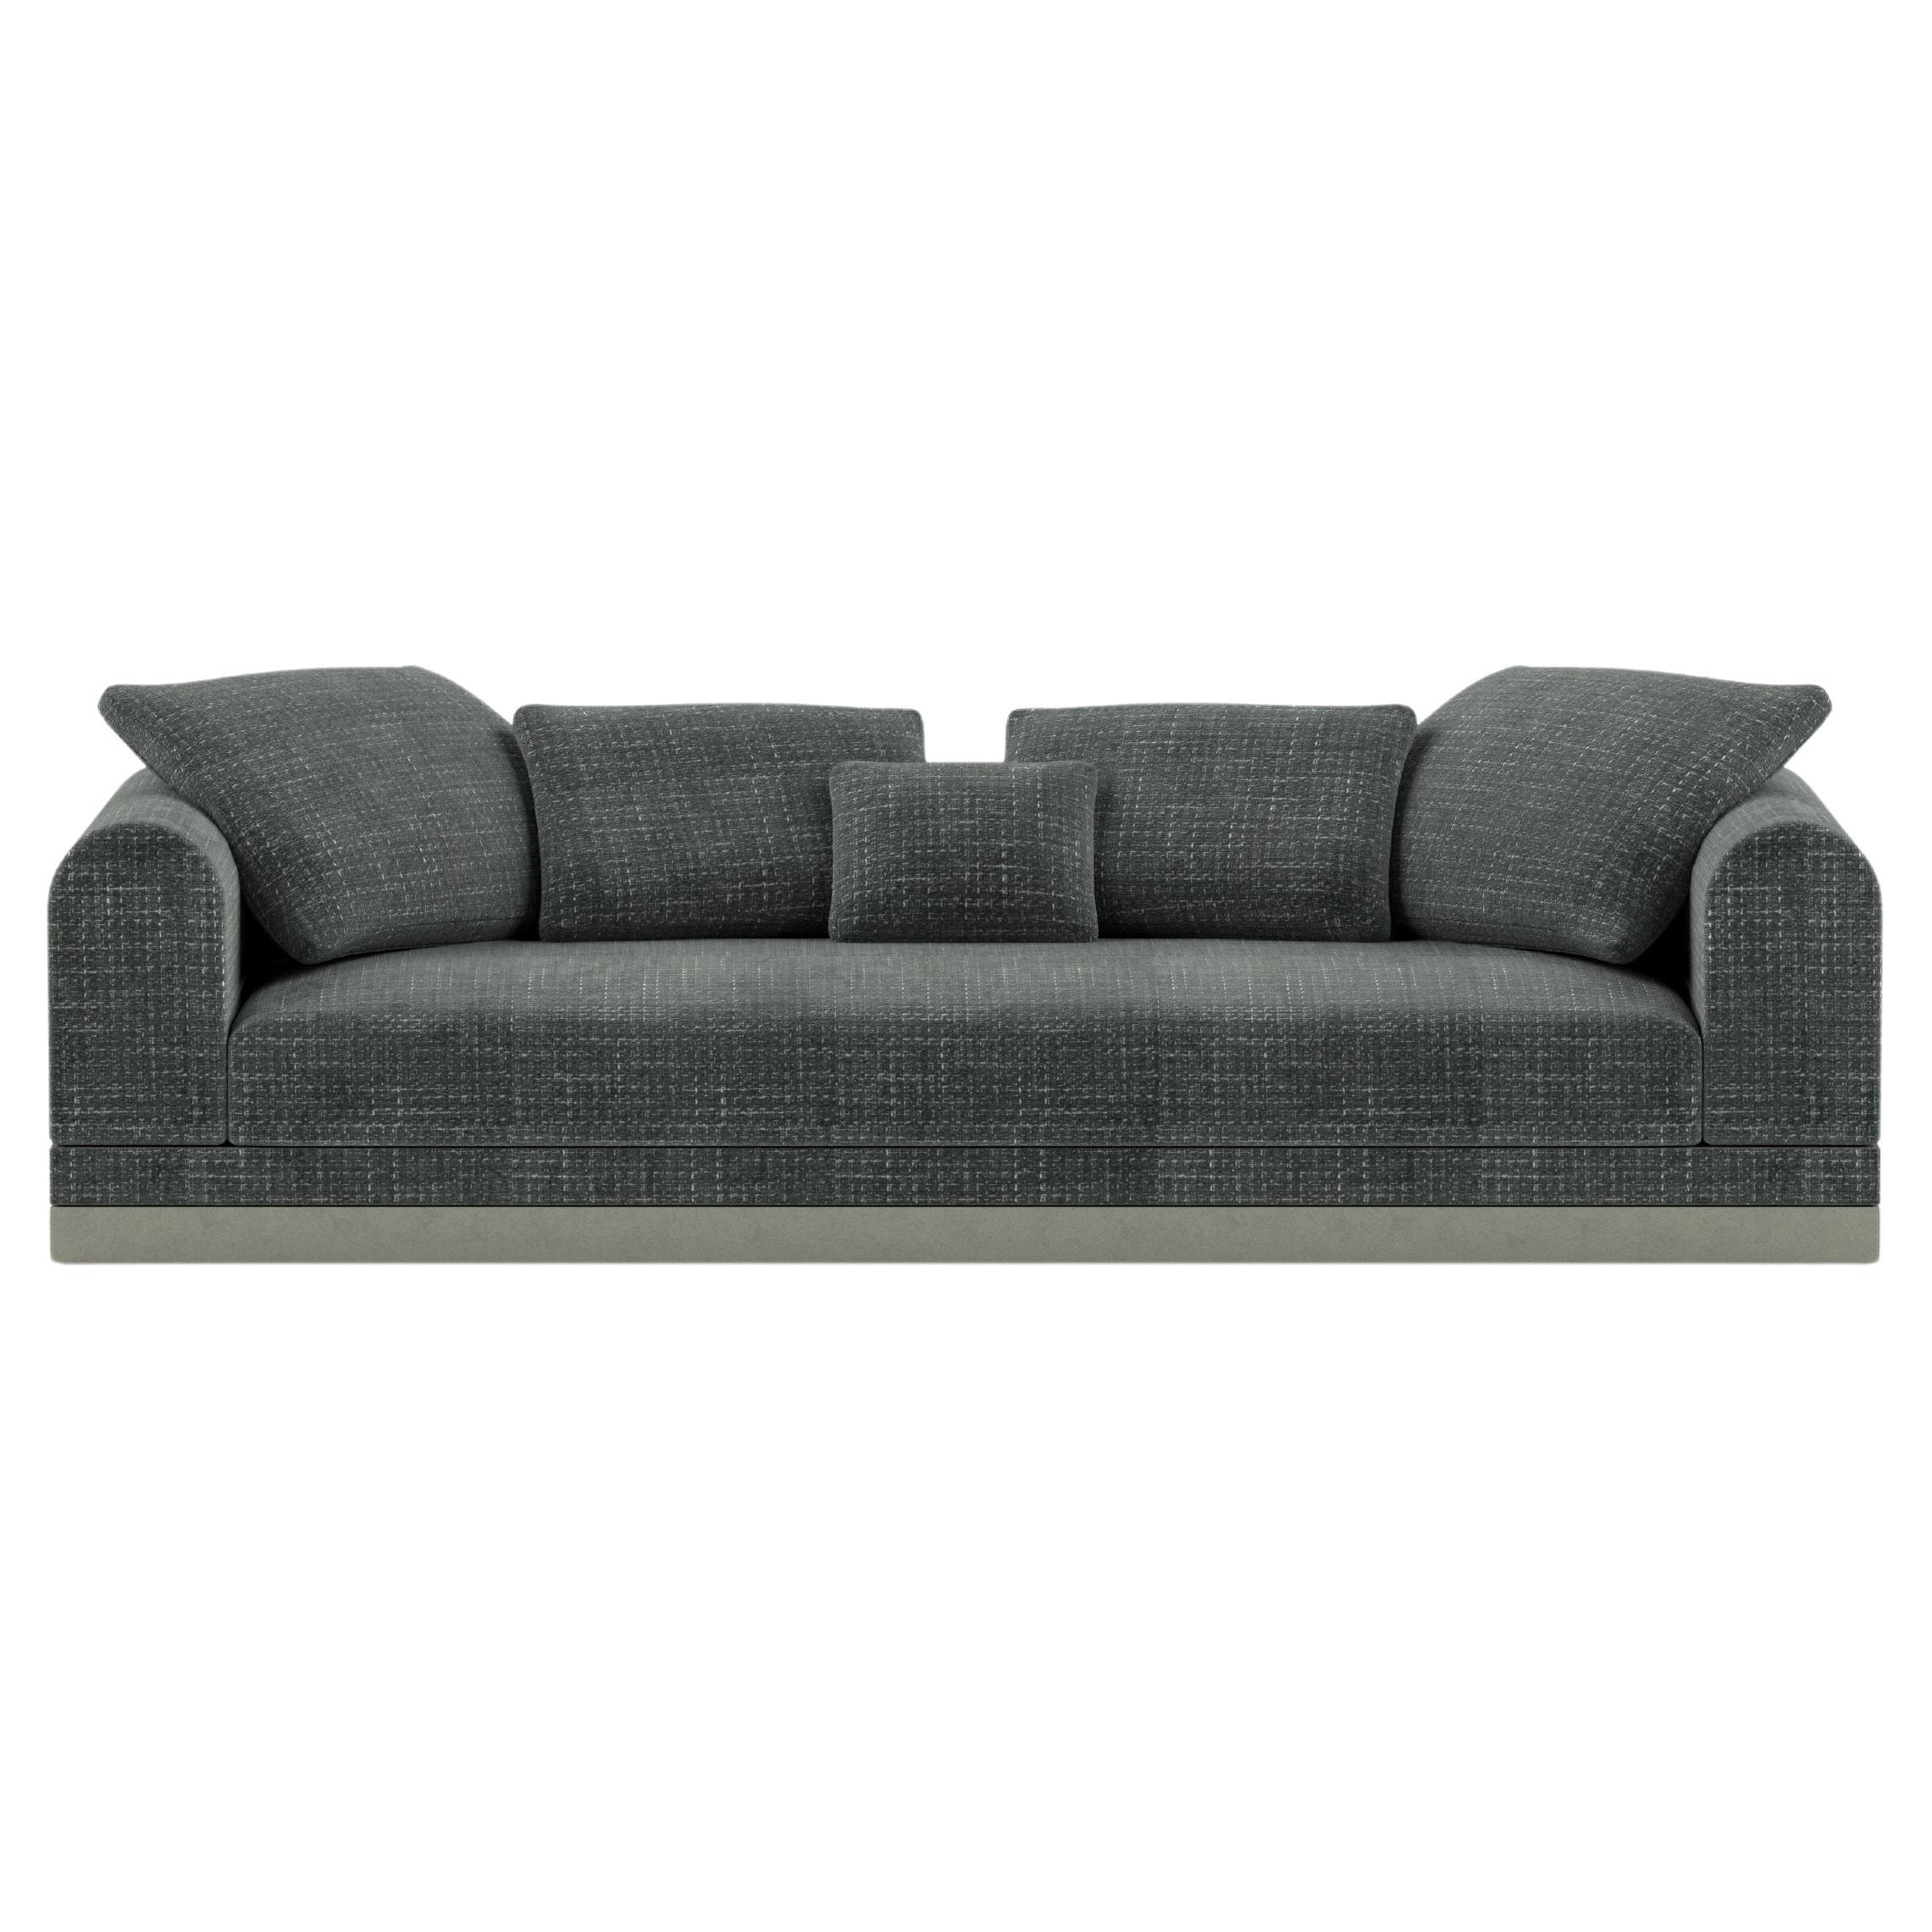 Contemporary Large Sofa 'Aqueduct' by Poiat, Yang 95, Low Plinth For Sale